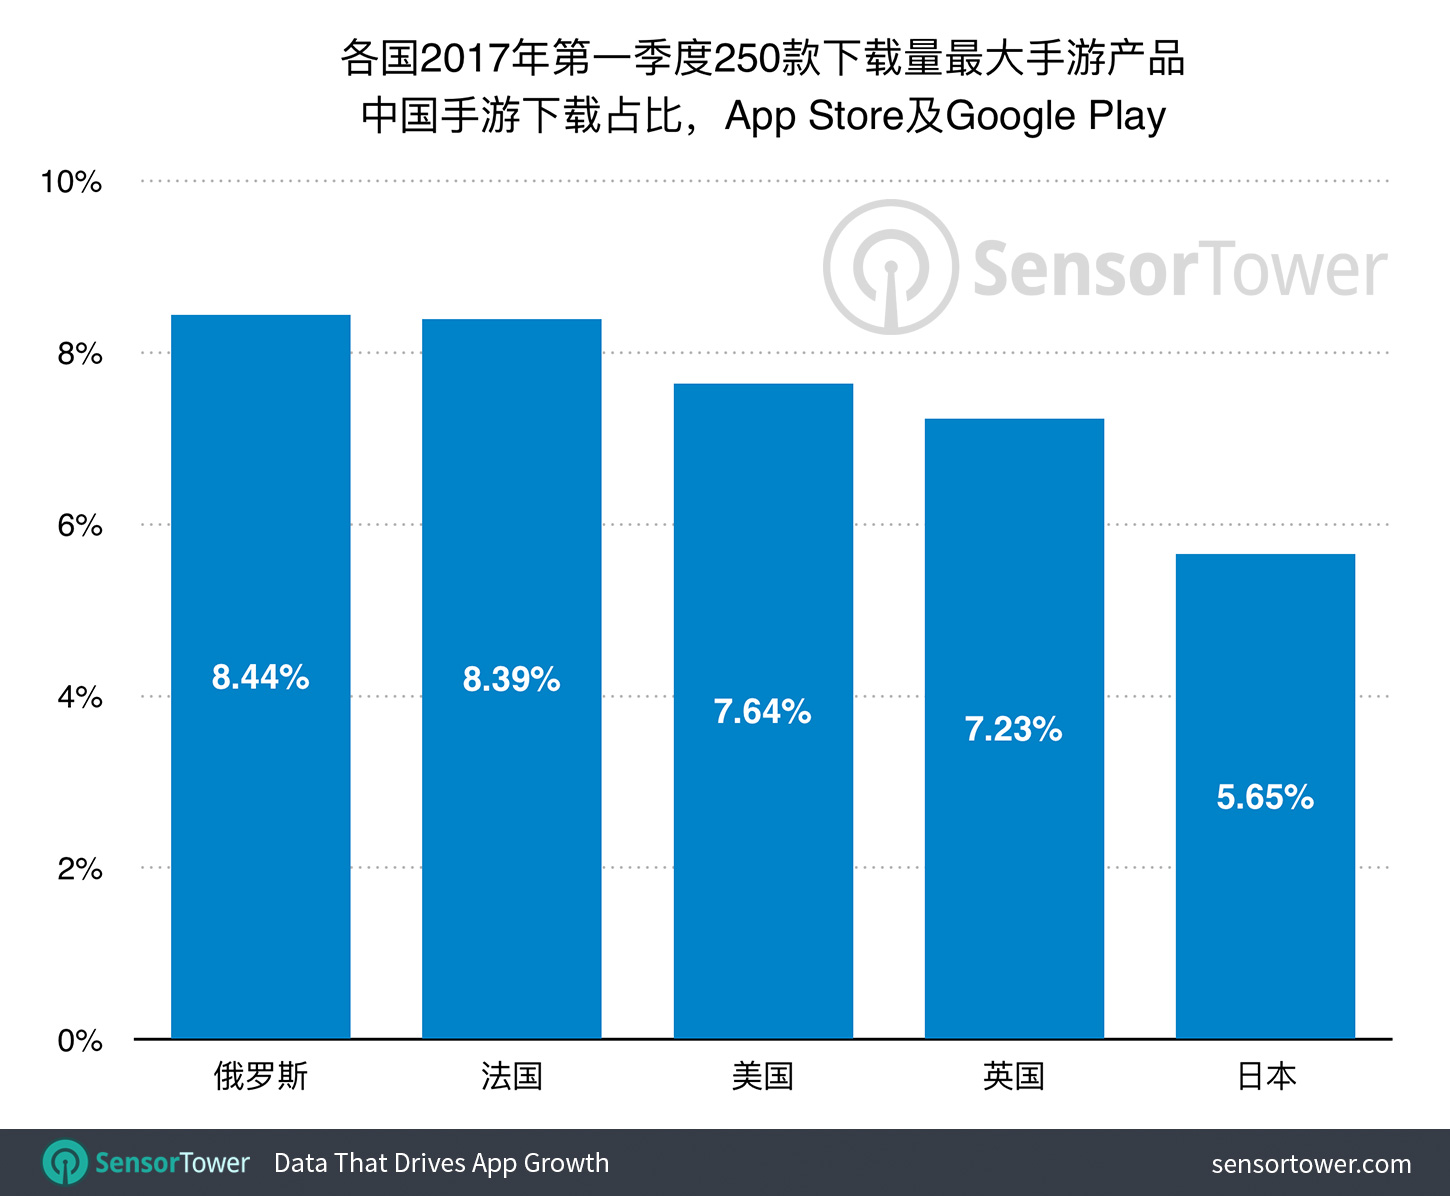 Downloads of Chinese made mobile games as a percentage of all downloads for the world's largest app markets